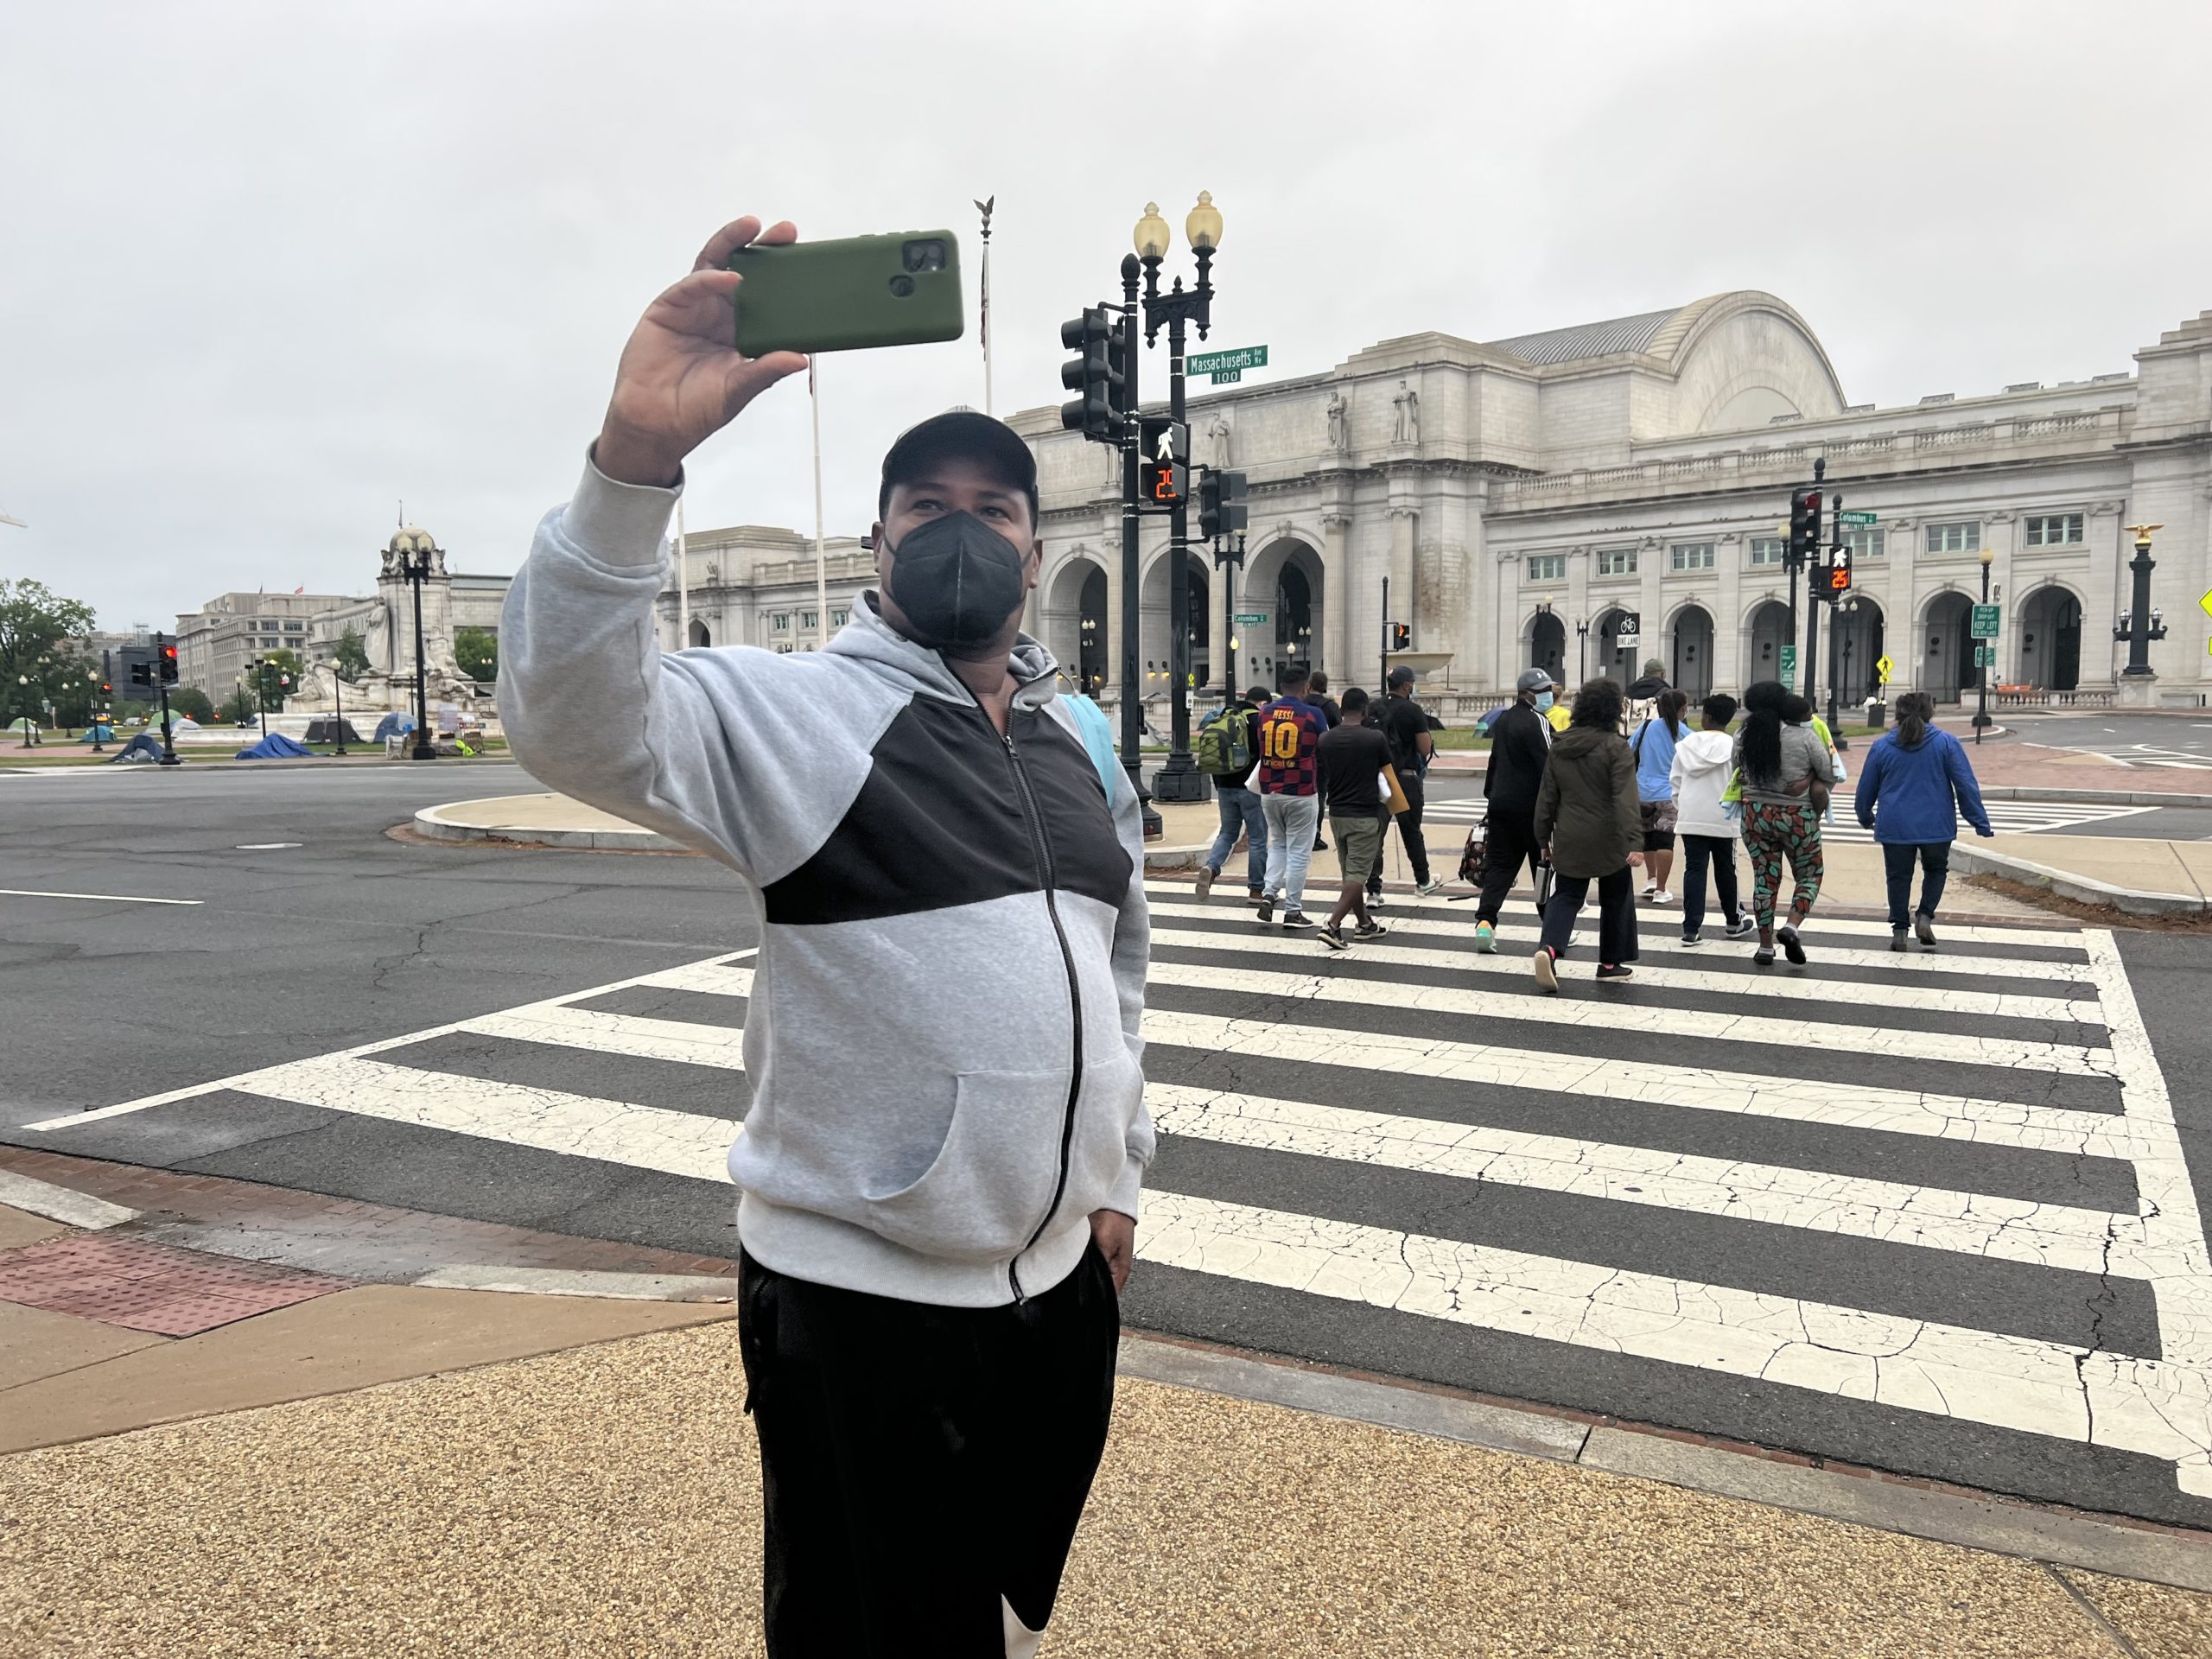 A migrant bused from Texas take selfies in D.C. Jennie Taer//Daily Caller News Foundation